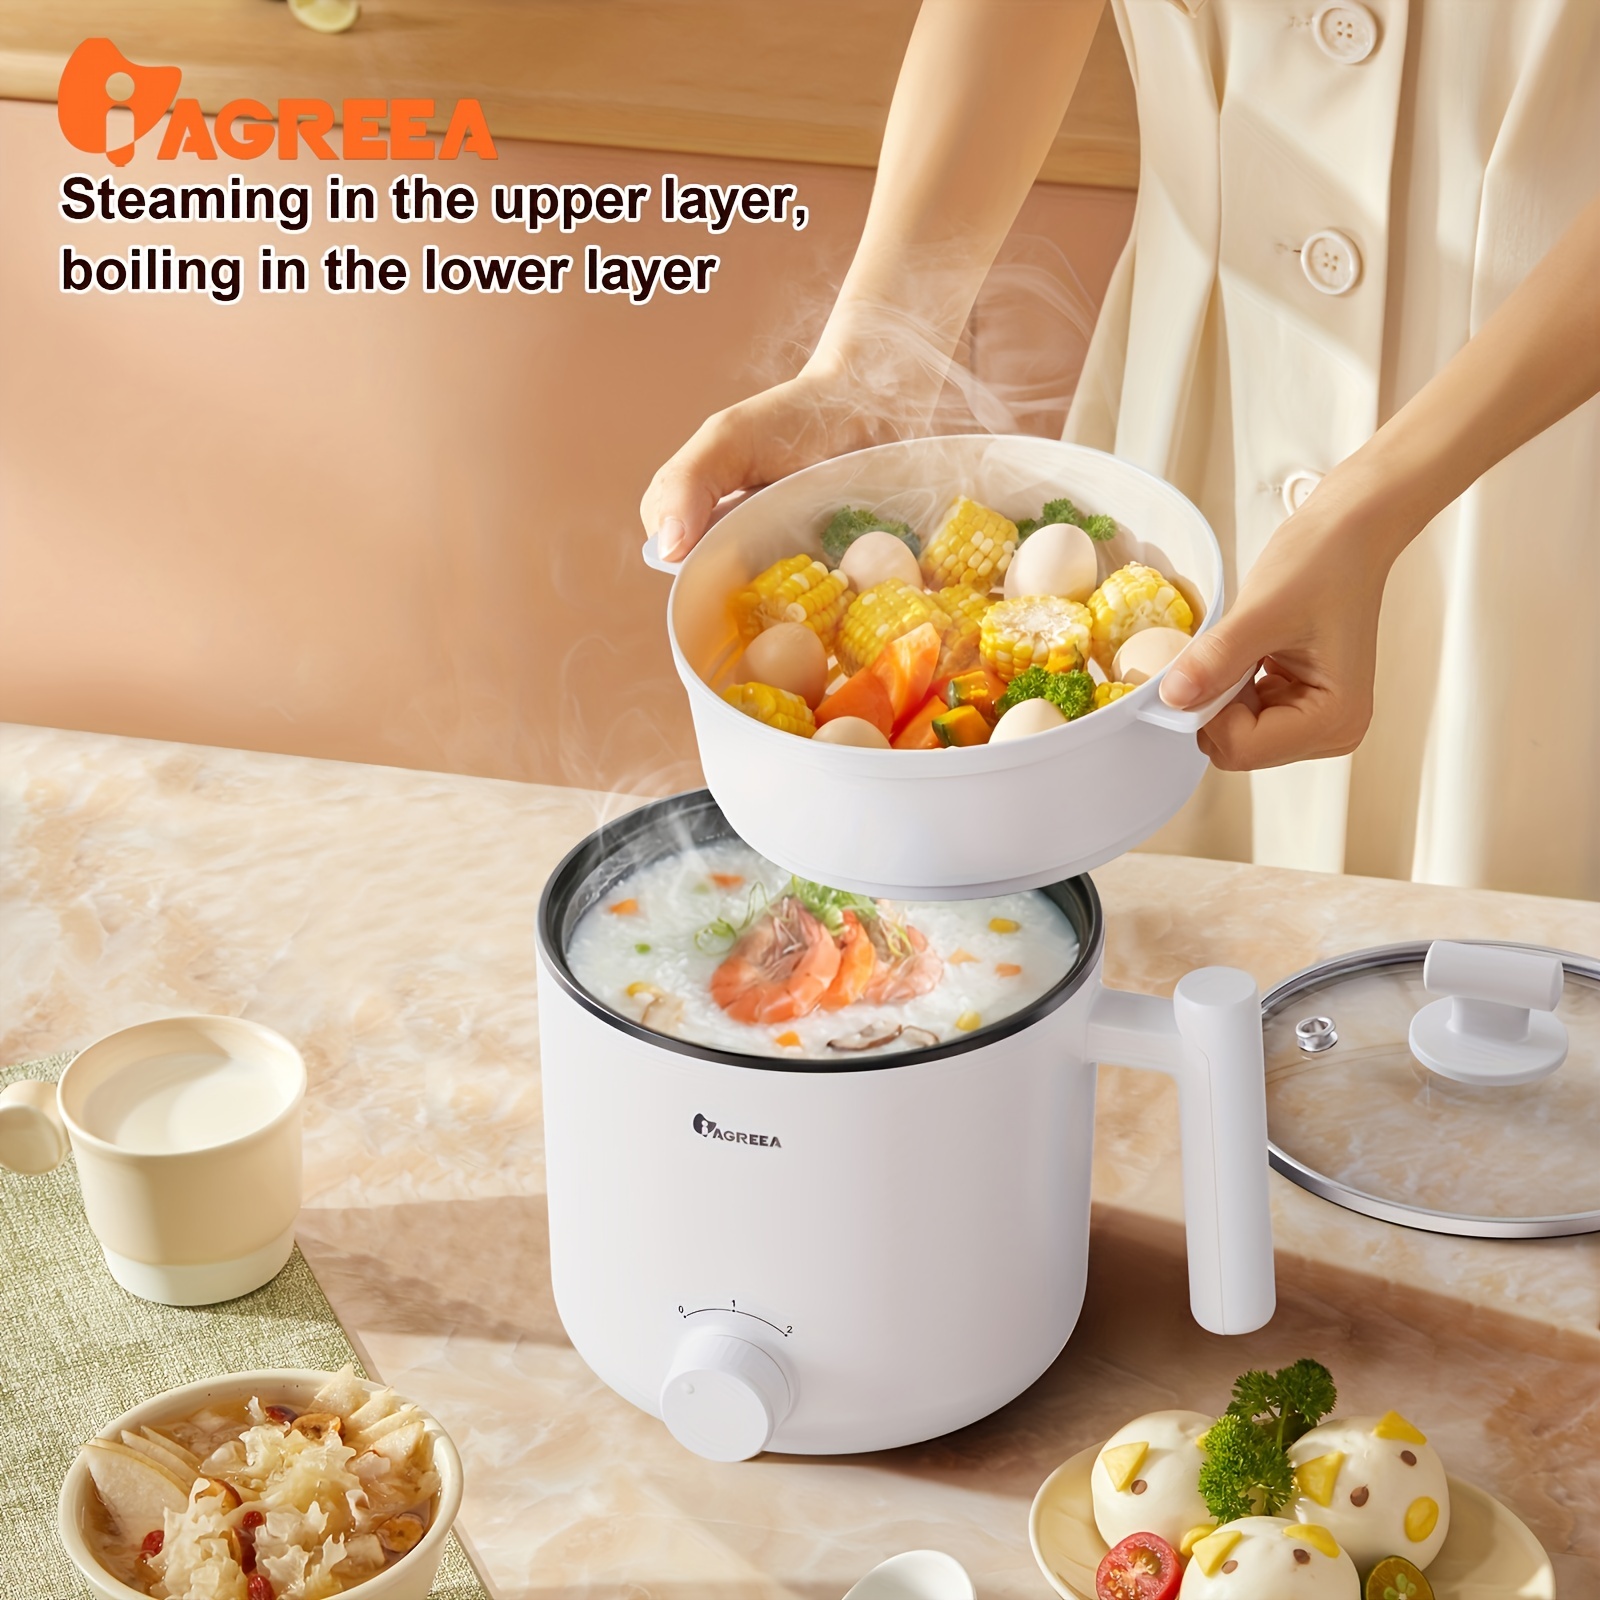 Commercial Rice Cooker & Food Warmer, 8.17qt /40 Cups Cooked Rice, Fast  Cooking Electric Large Capacity Rice Cooker For Restaurant, Auto Keep Warm